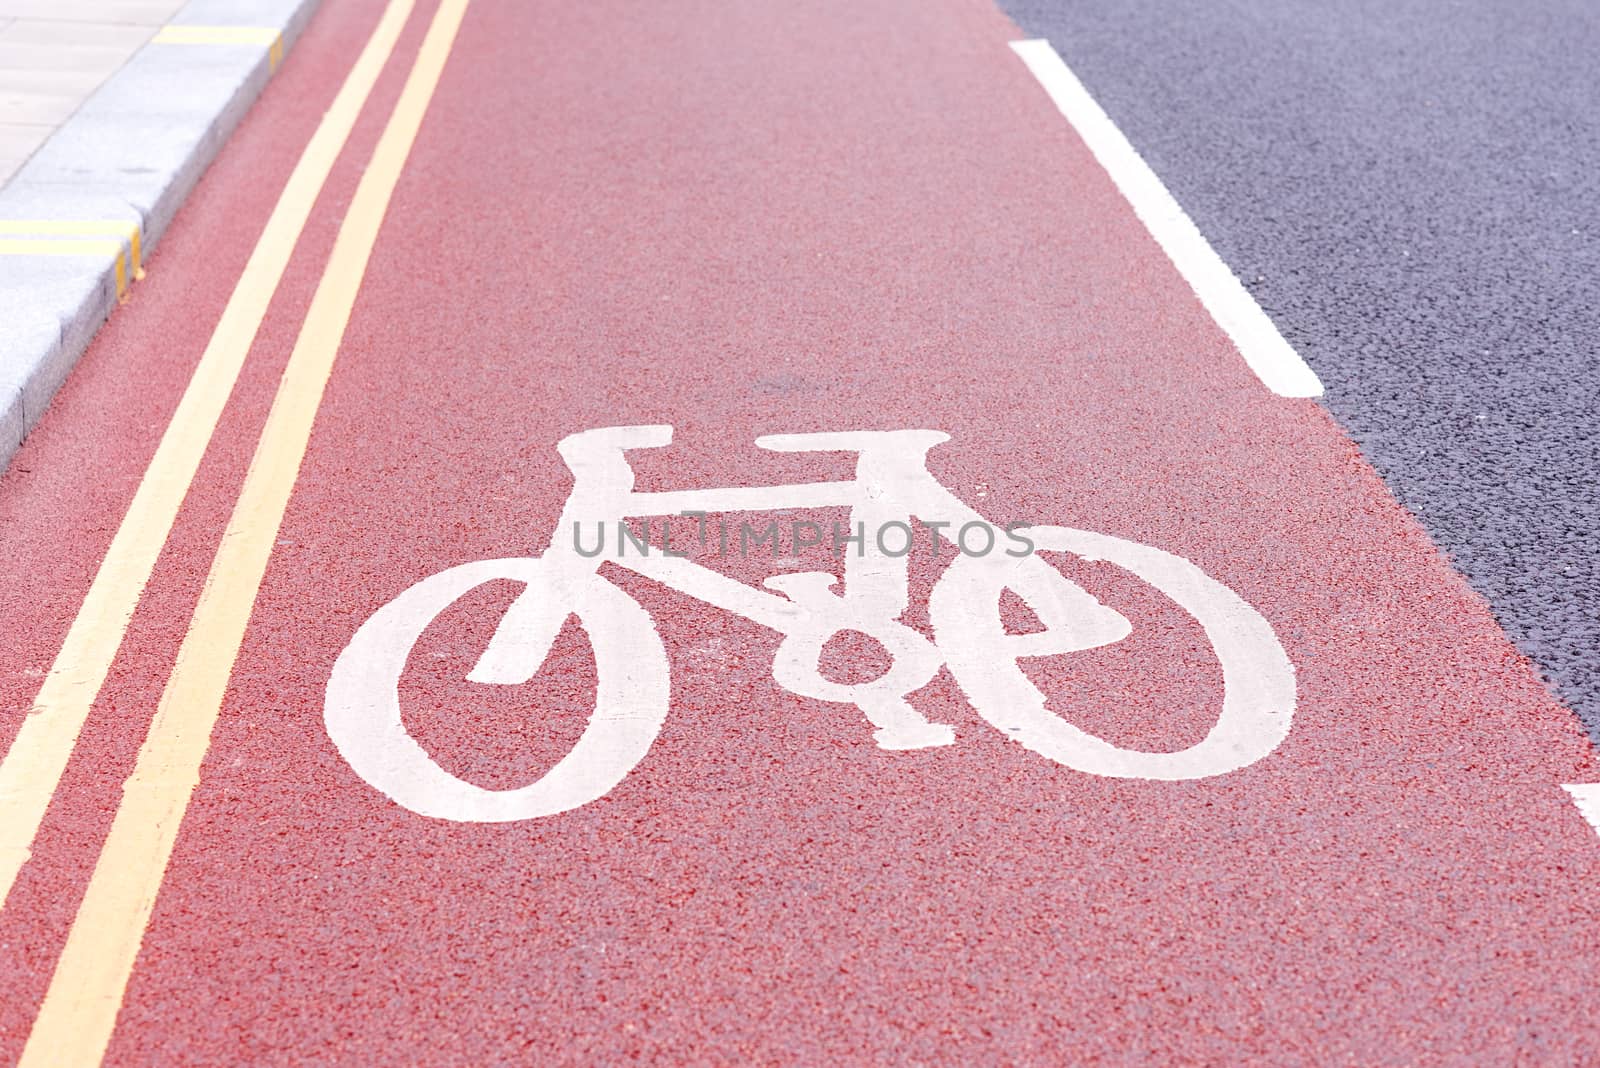 bicycle lane sign in a city